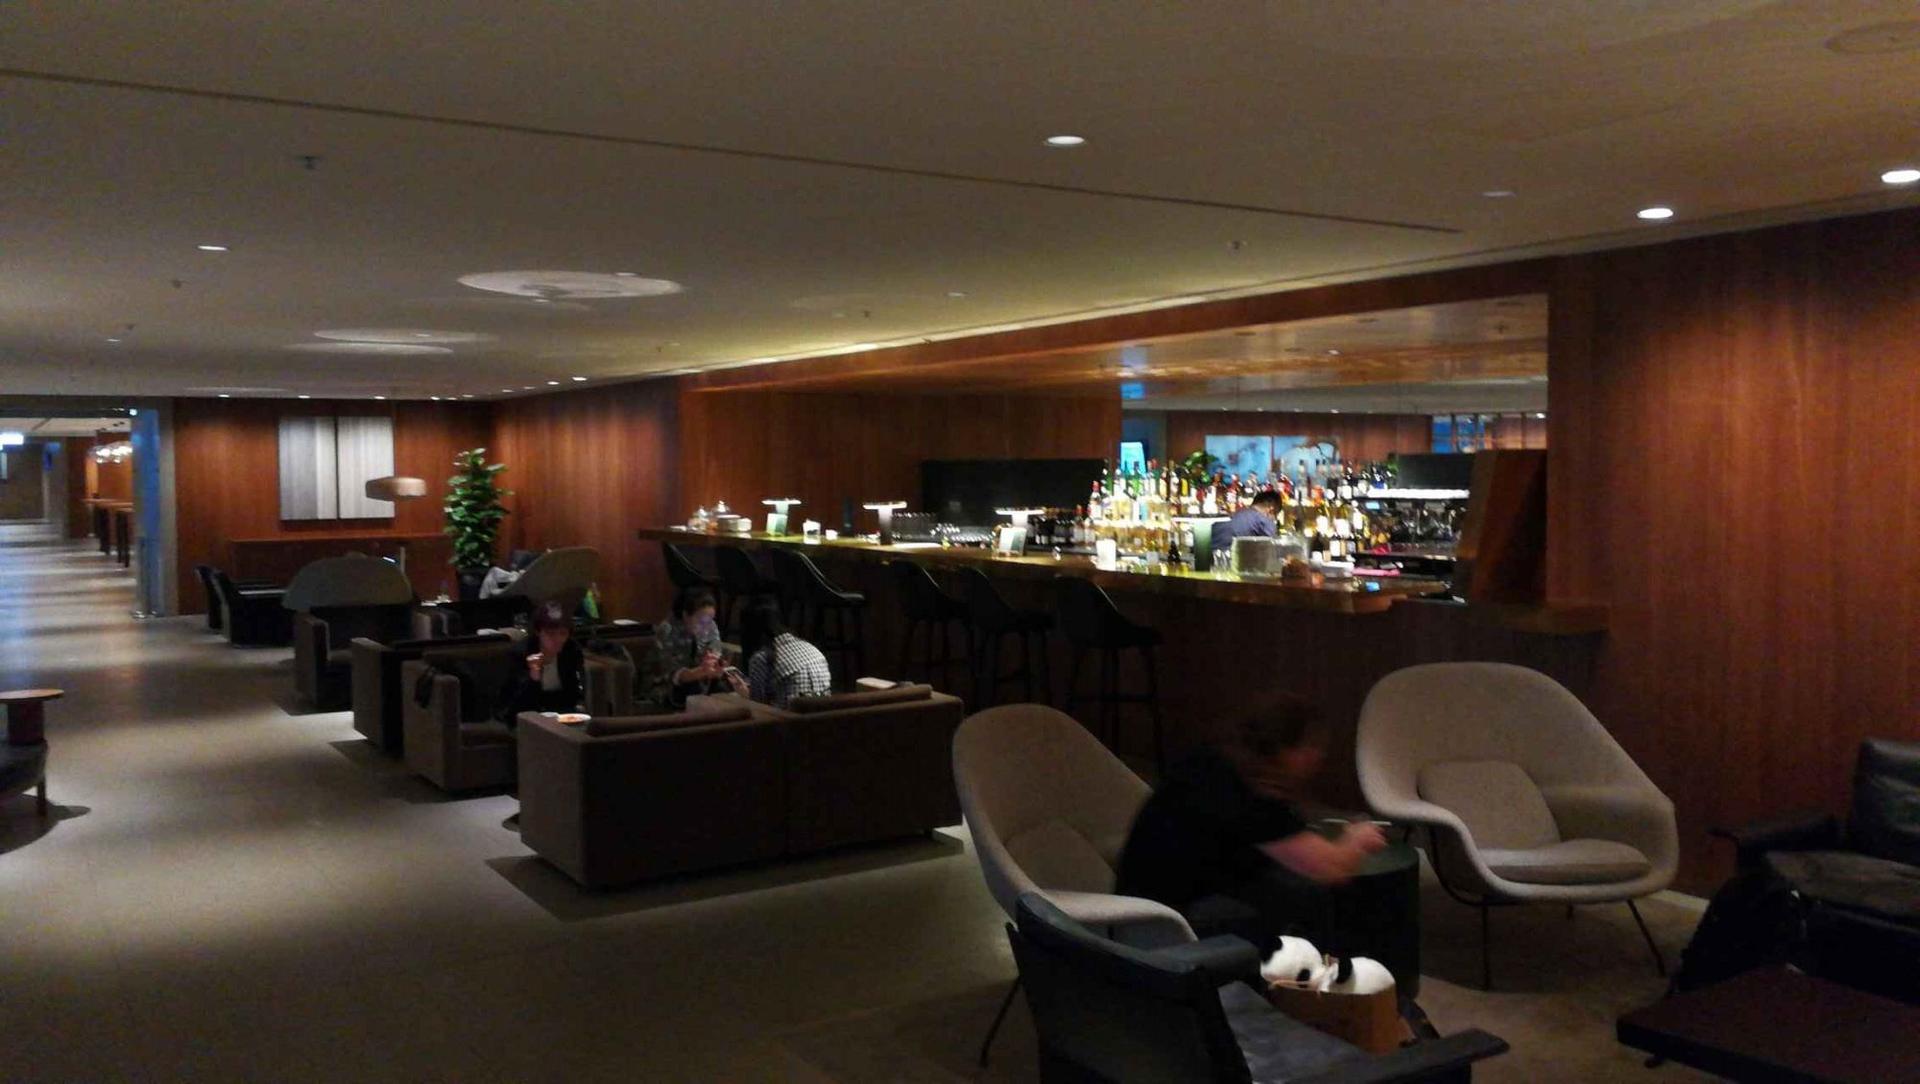 Cathay Pacific The Pier Business Class Lounge image 35 of 61